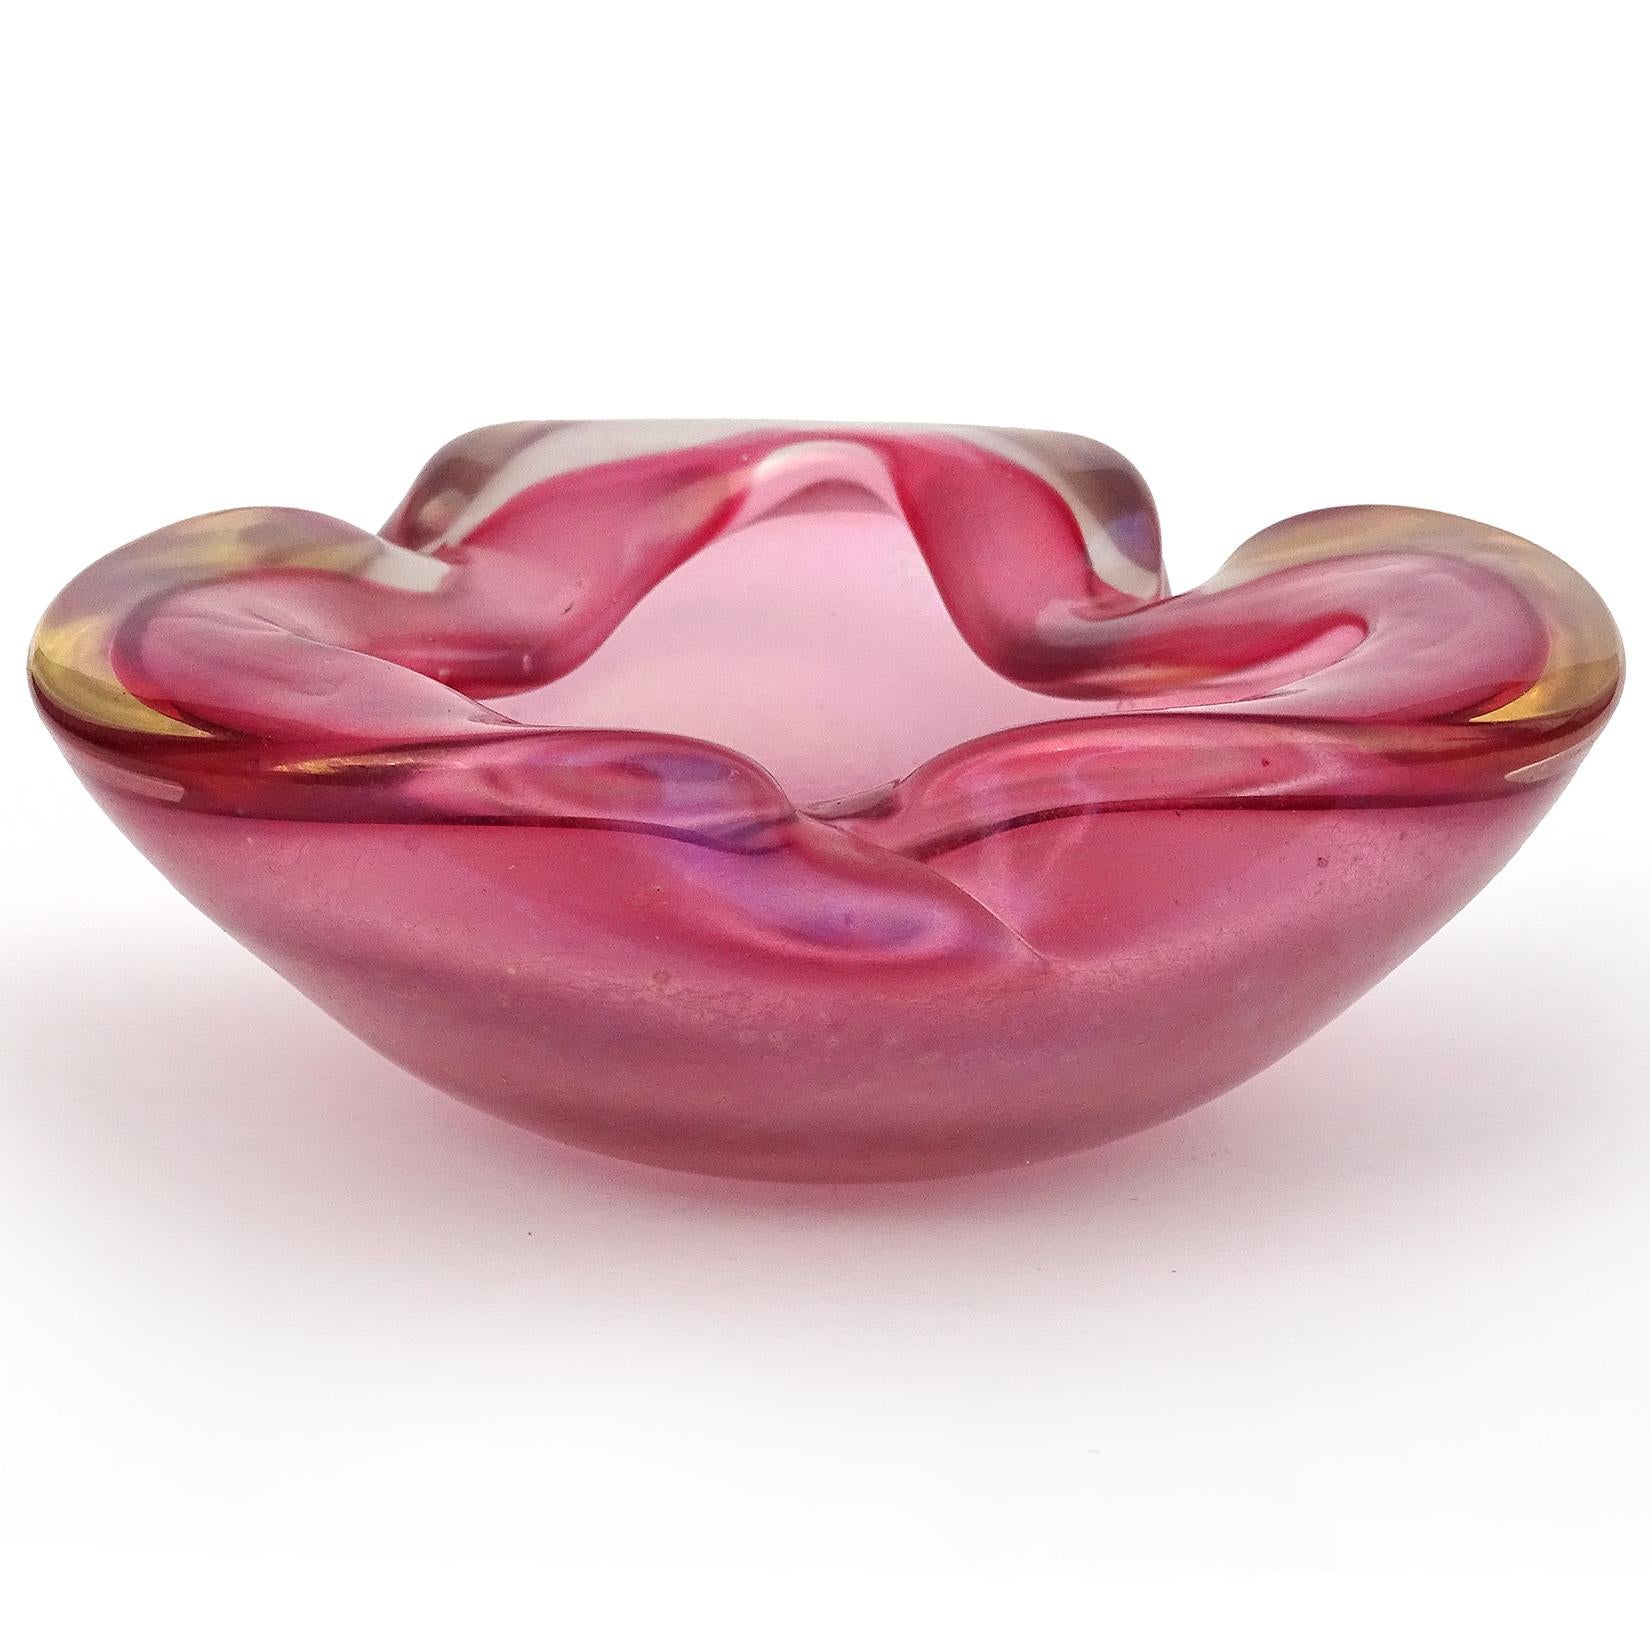 Only 1 Left! - Beautiful vintage Murano hand blown Sommerso iridescent pink Italian art glass folded over rim bowl / ashtray. Documented to Master glass artist and designer Alfredo Barbini, circa 1950-1960. The bowl has a heavy aurene / iridescent